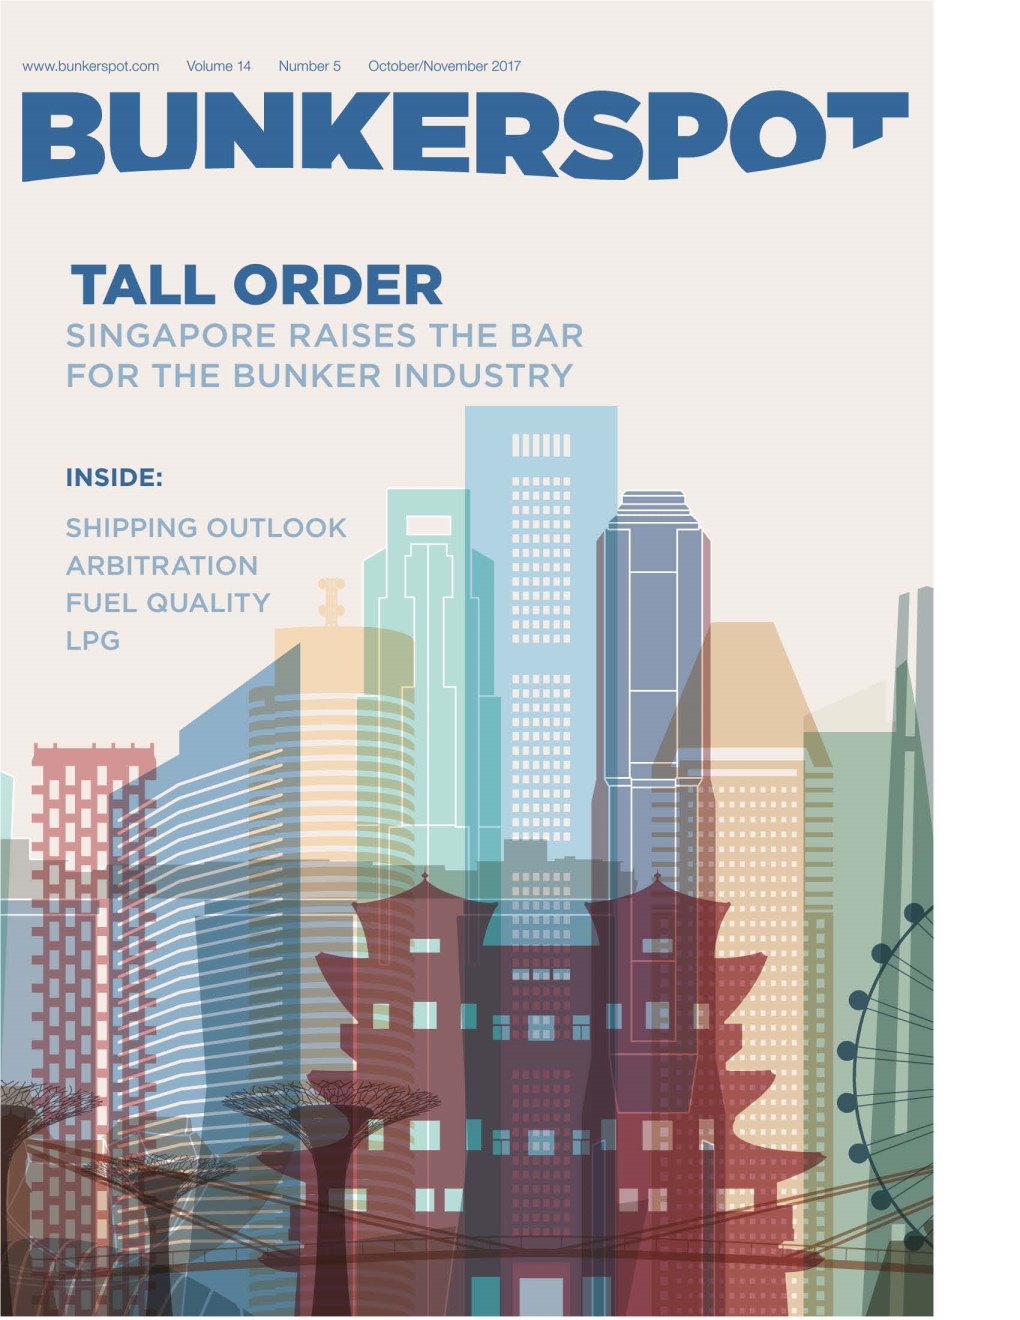 Tallorder Singapore Raises the Bar for the Bunker Industry